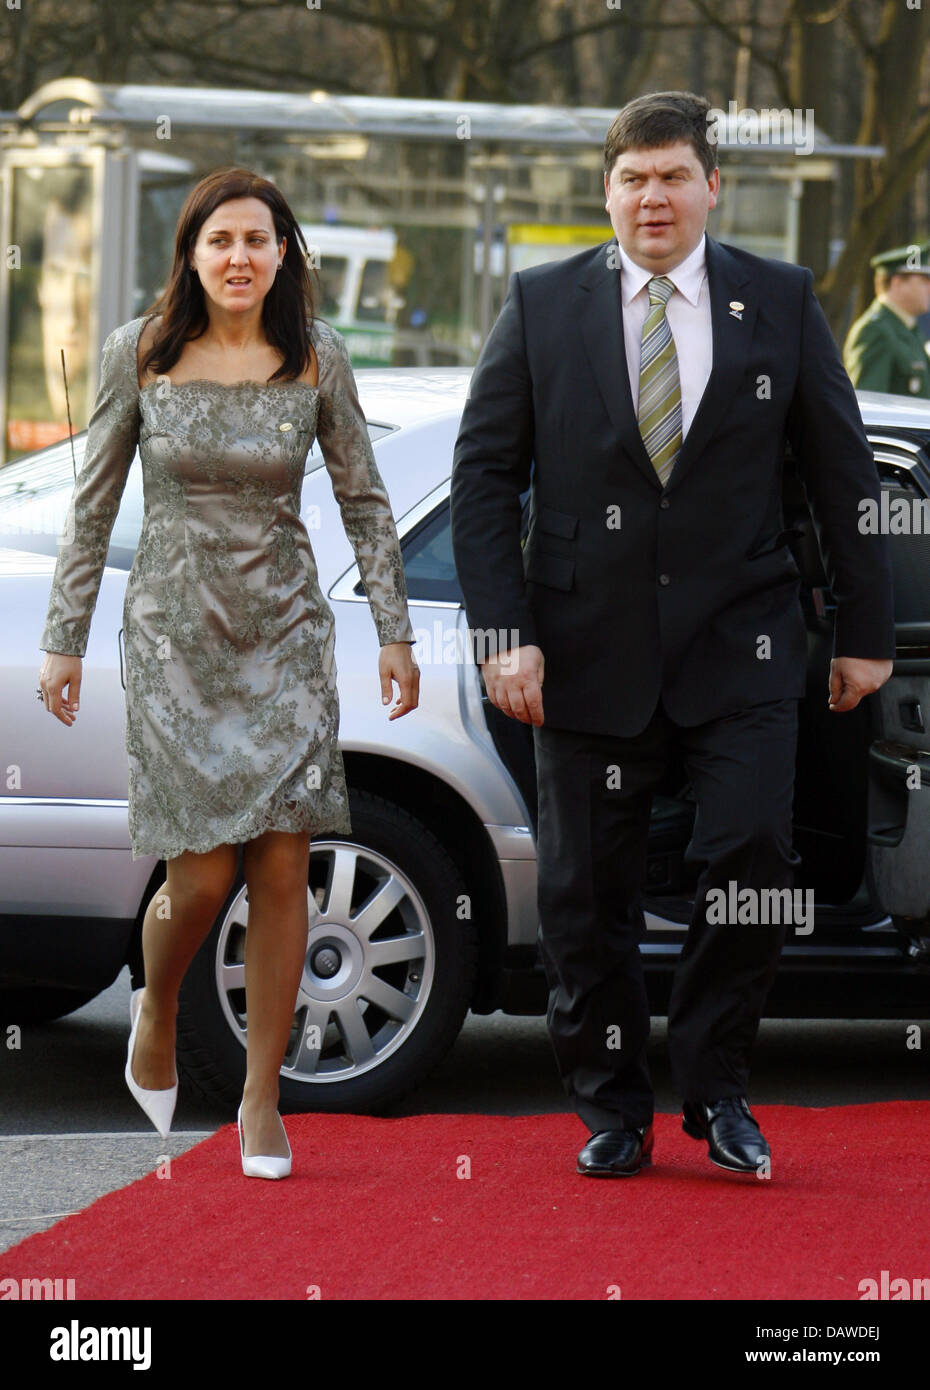 The Latvian Prime Minister Aigars Kalvitis and his wife Kristine Kalvite arrive at a celebration on the occasion of the 50th anniversary of the Treaty of Rome in Berlin, 24 March 2007. Photo: Johannes Eisele Stock Photo